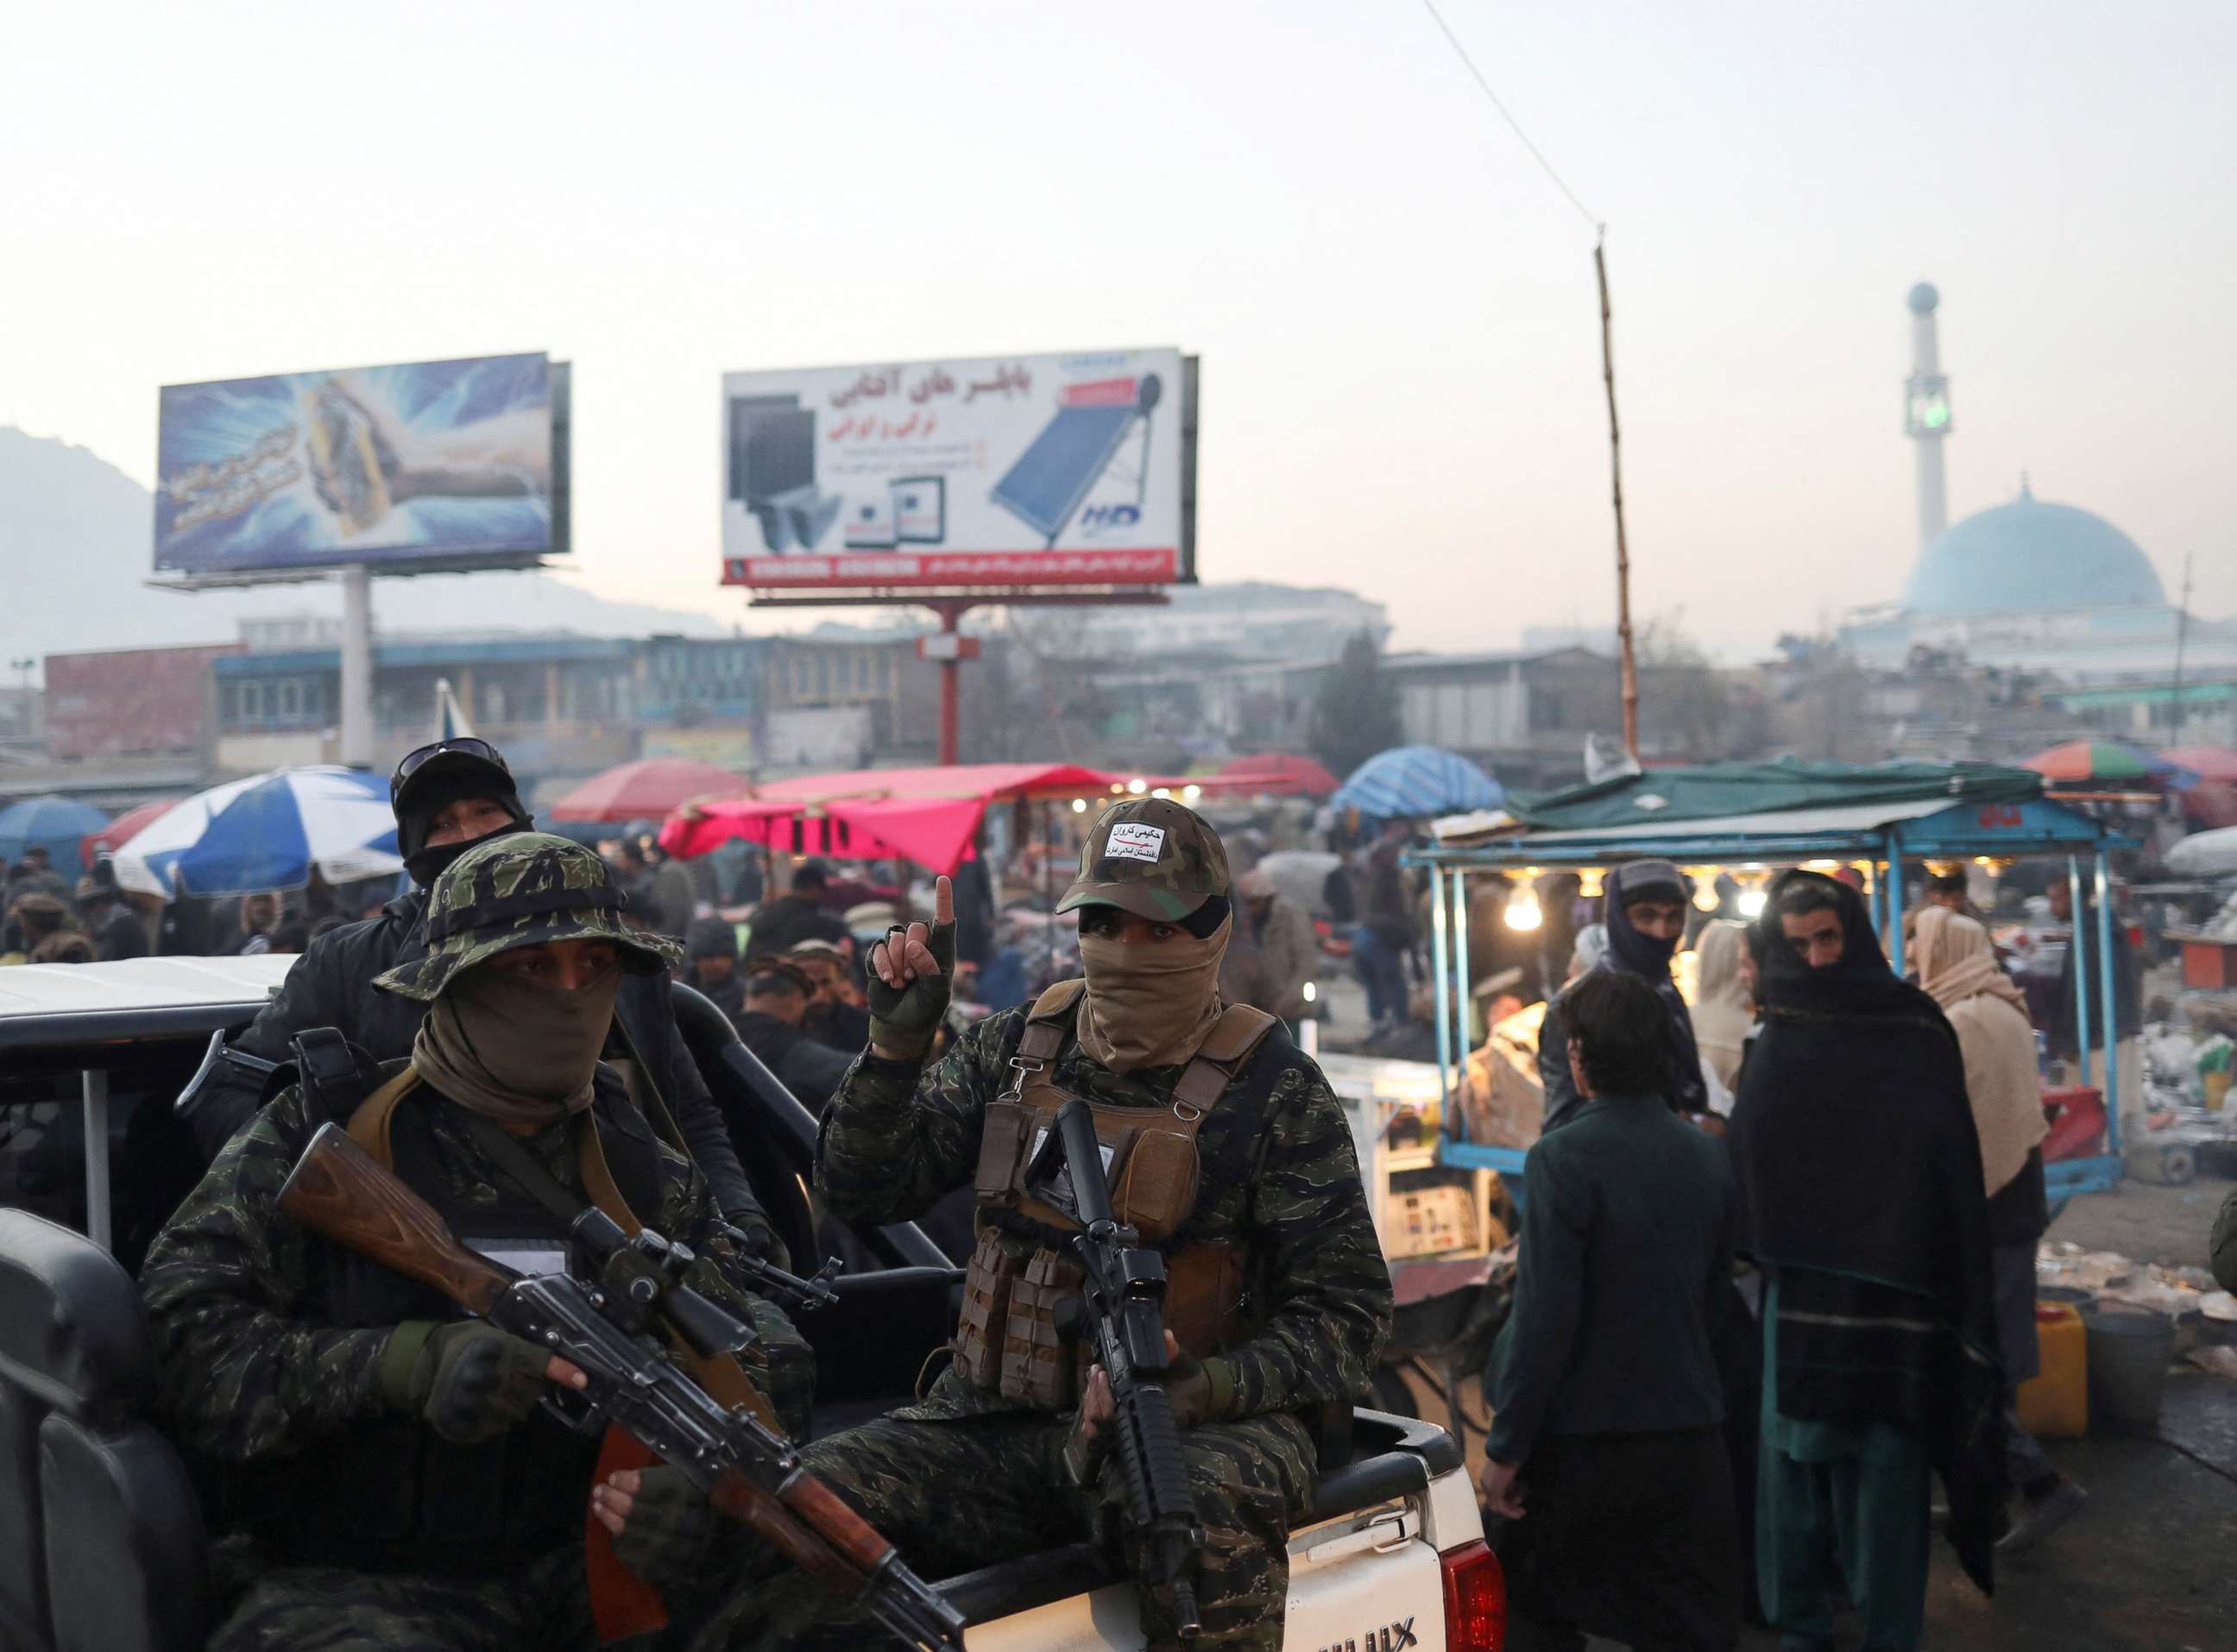 PHOTO: Taliban forces sit in the back of a vehicle as they patrol the city center of Kabul, Afghanistan, Dec. 10, 2021.